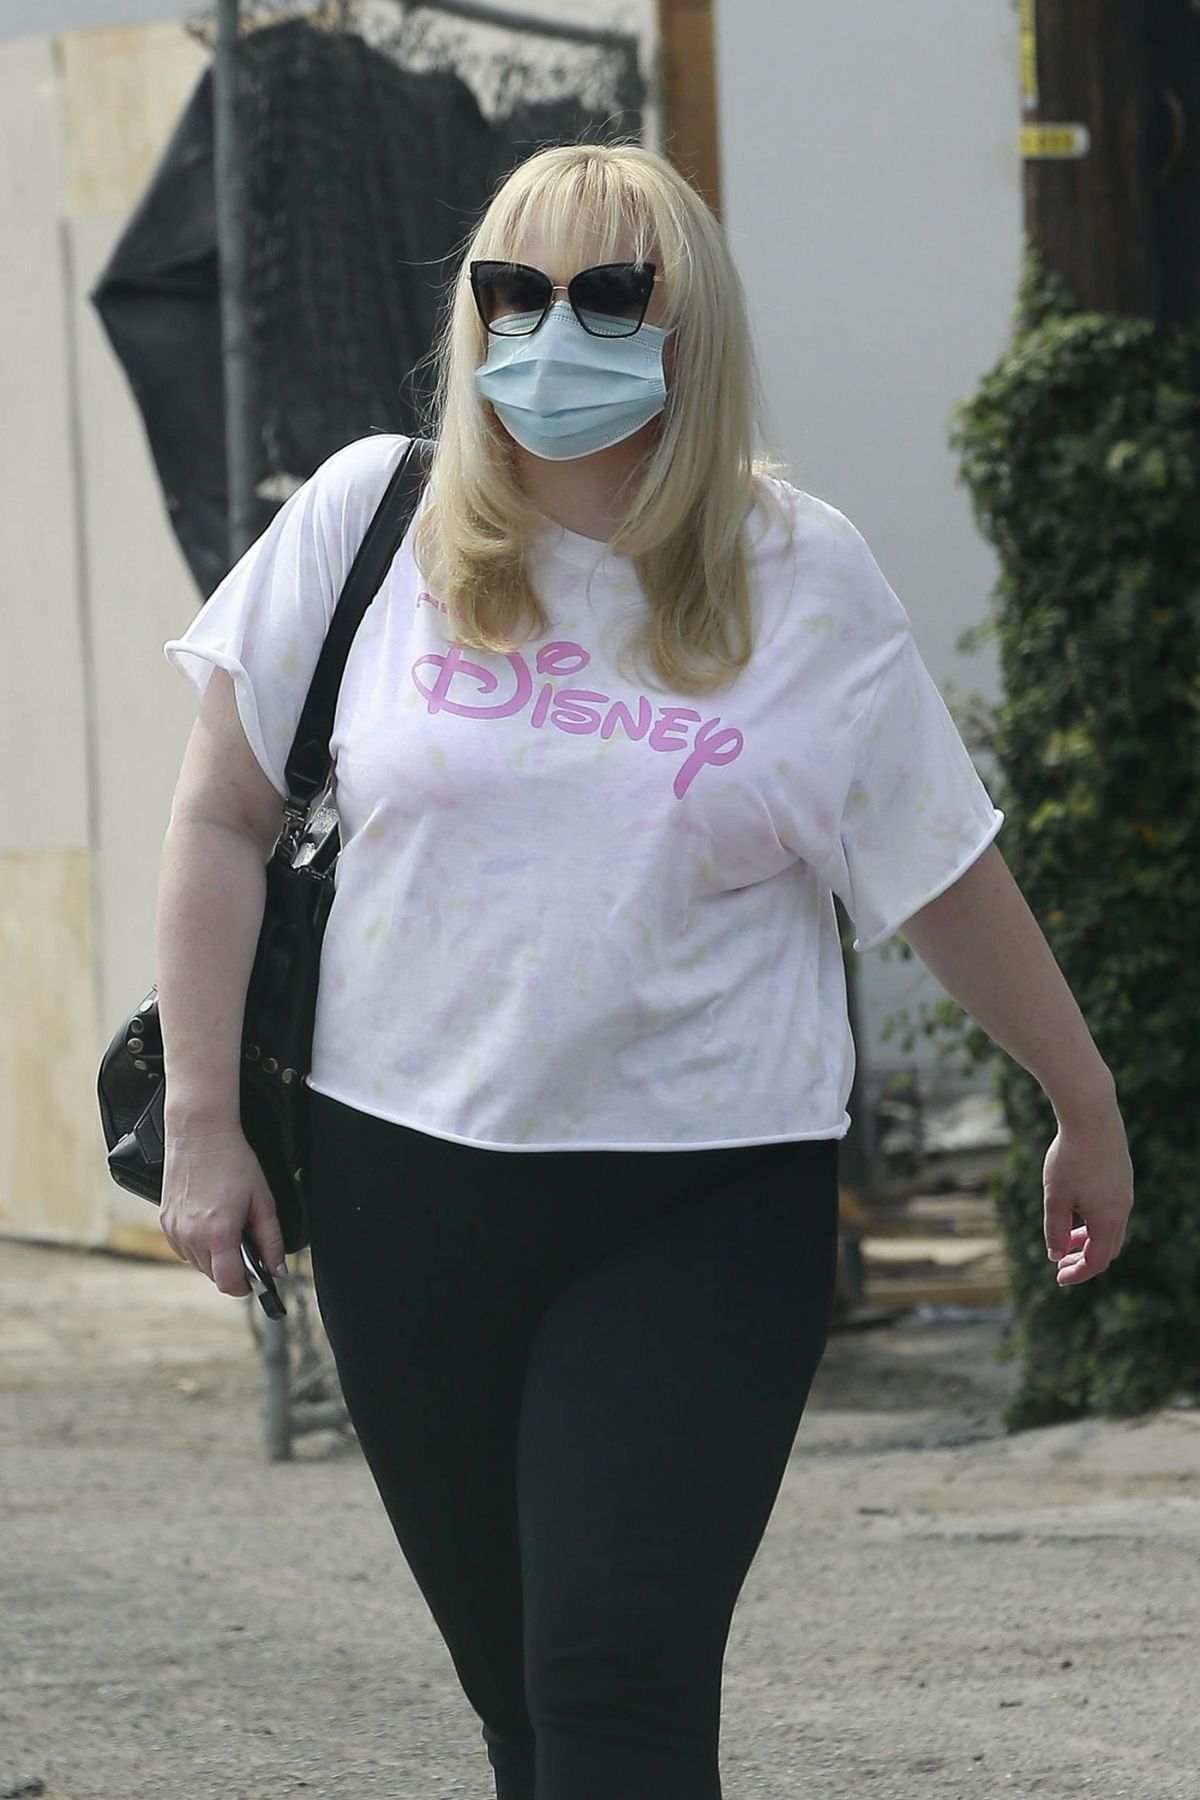 REBEL WILSON Wearing a Mask Out in West Hollywood 08/21/2020 – HawtCelebs